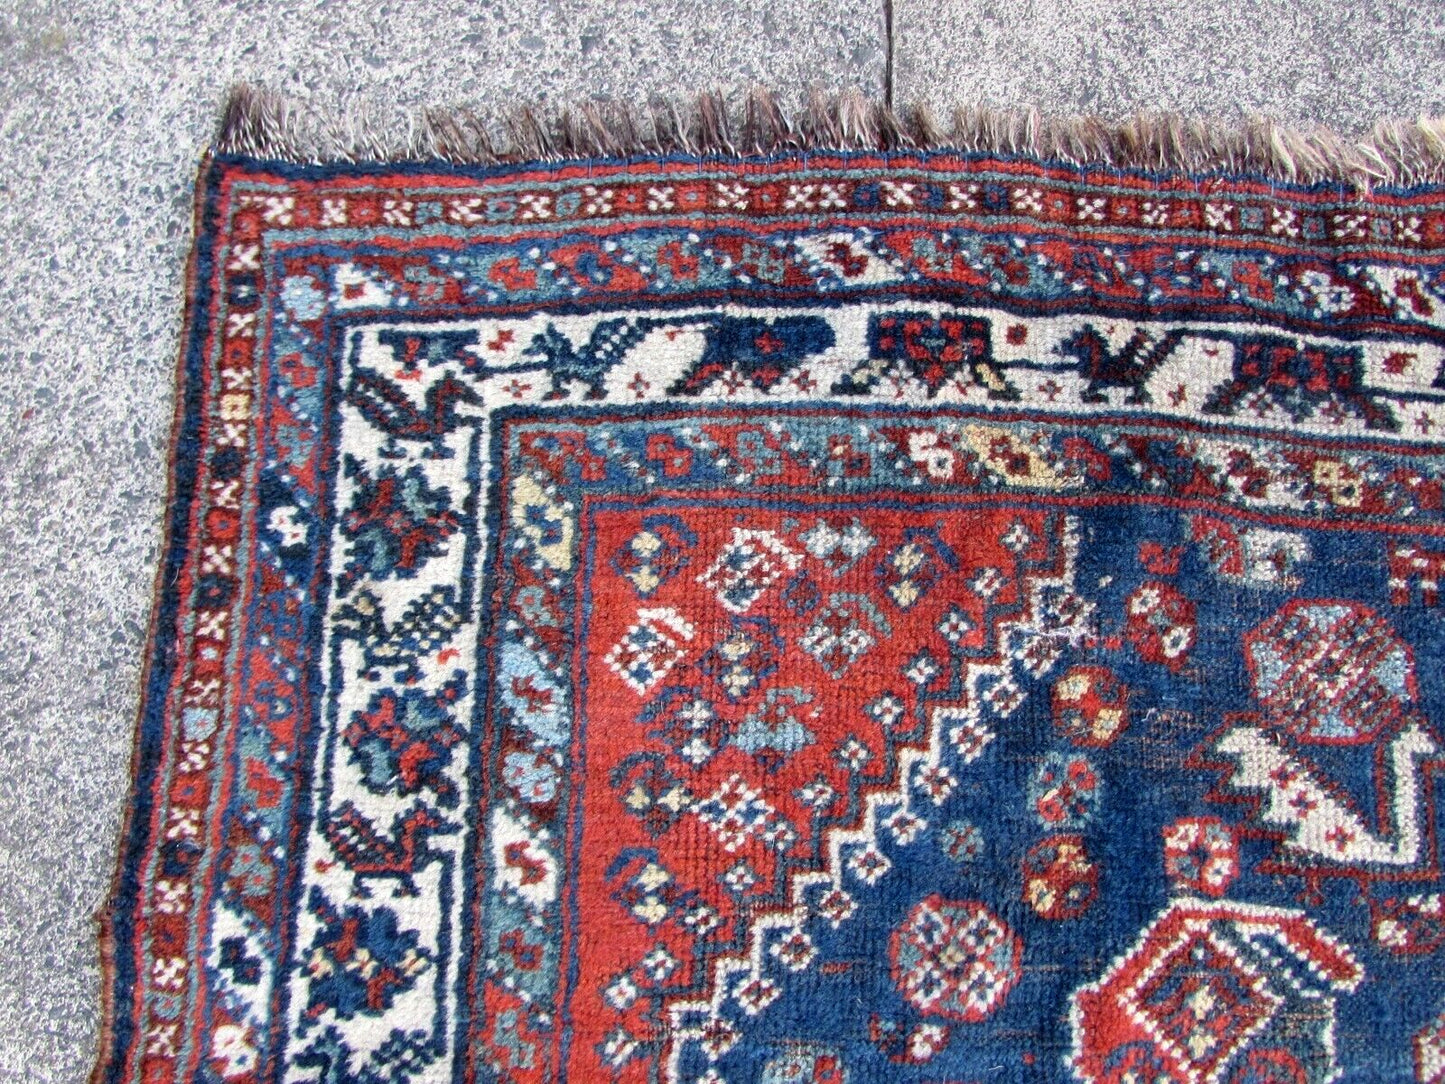 Detailed shot of the low pile on antique Middle Eastern rug